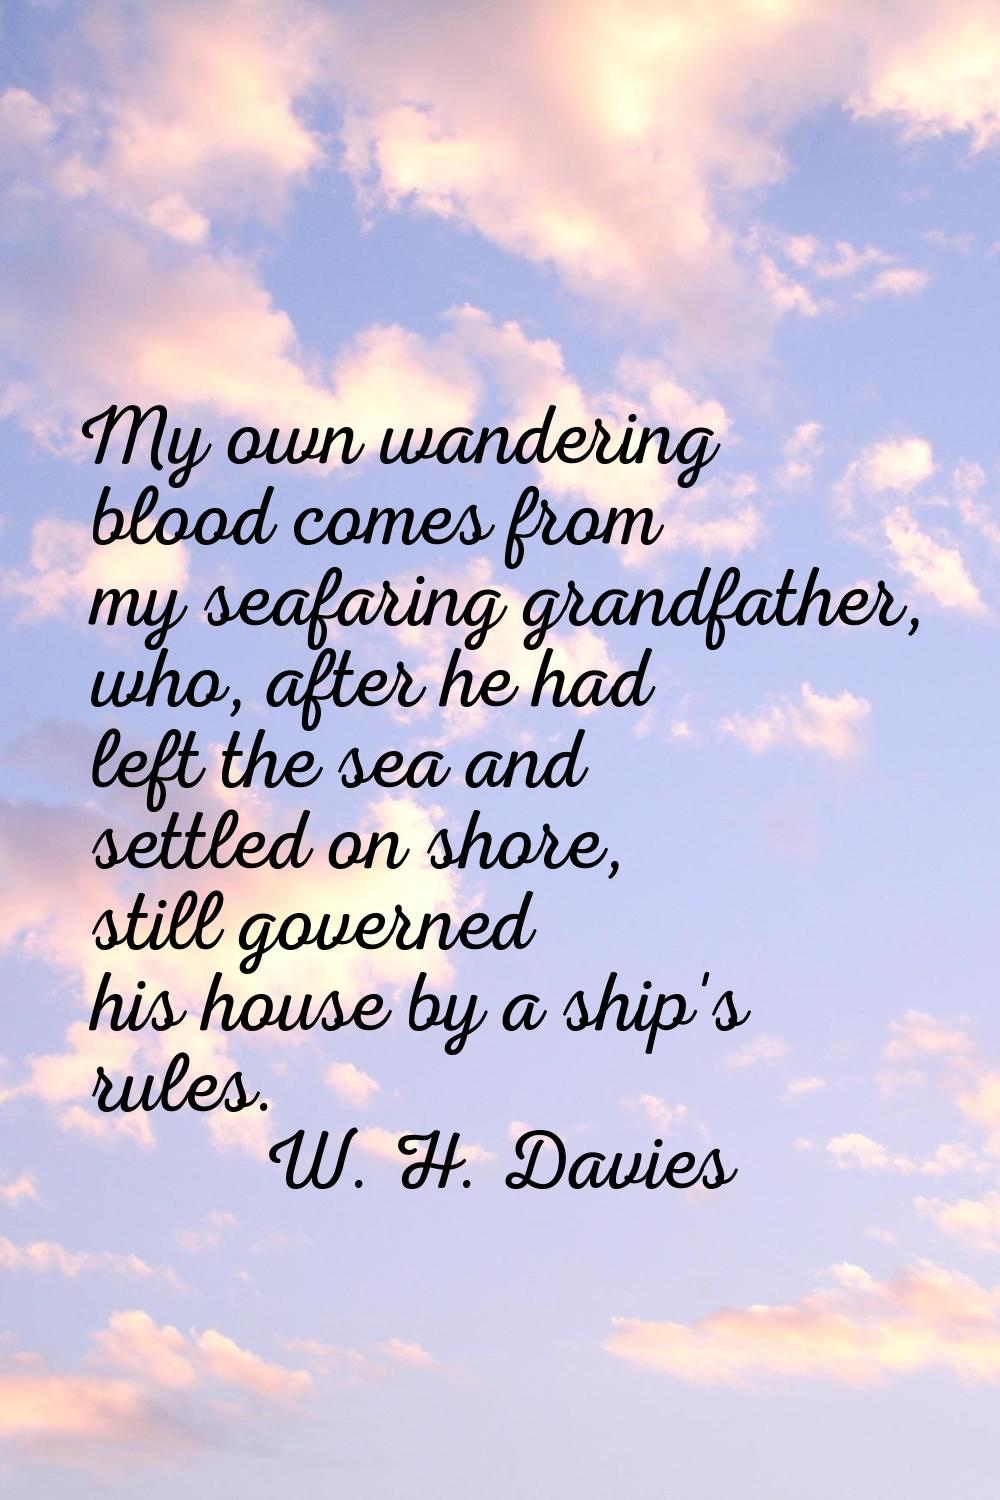 My own wandering blood comes from my seafaring grandfather, who, after he had left the sea and sett